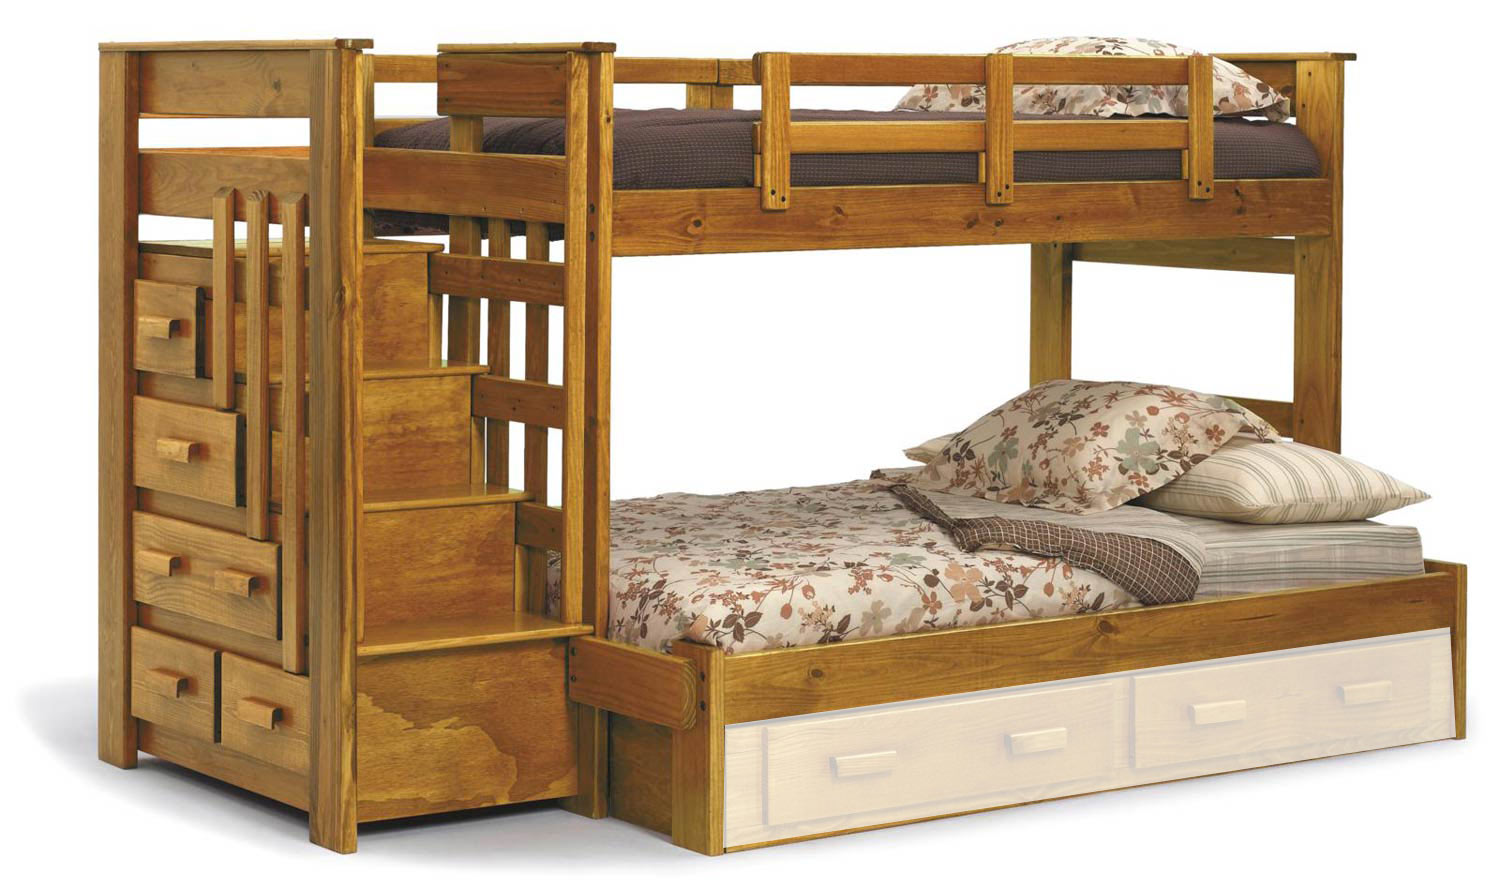 Chelsea Home 36500 Twin Over Full Bunk Bed with Stairway Chest - Honey